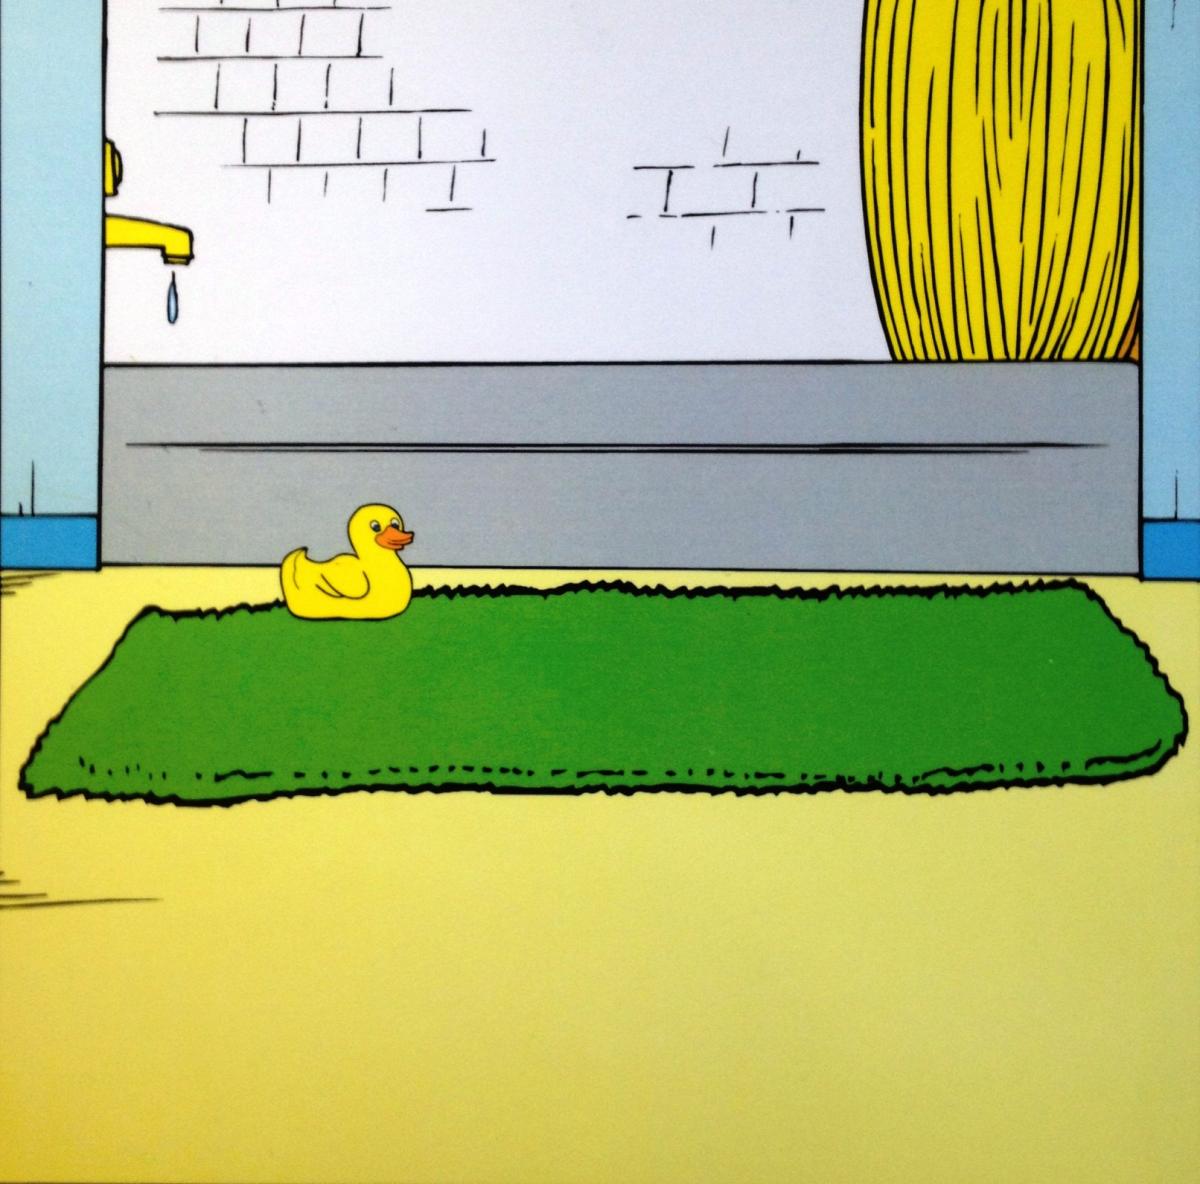 Color drawing with yellow duck on green rug by bathtub